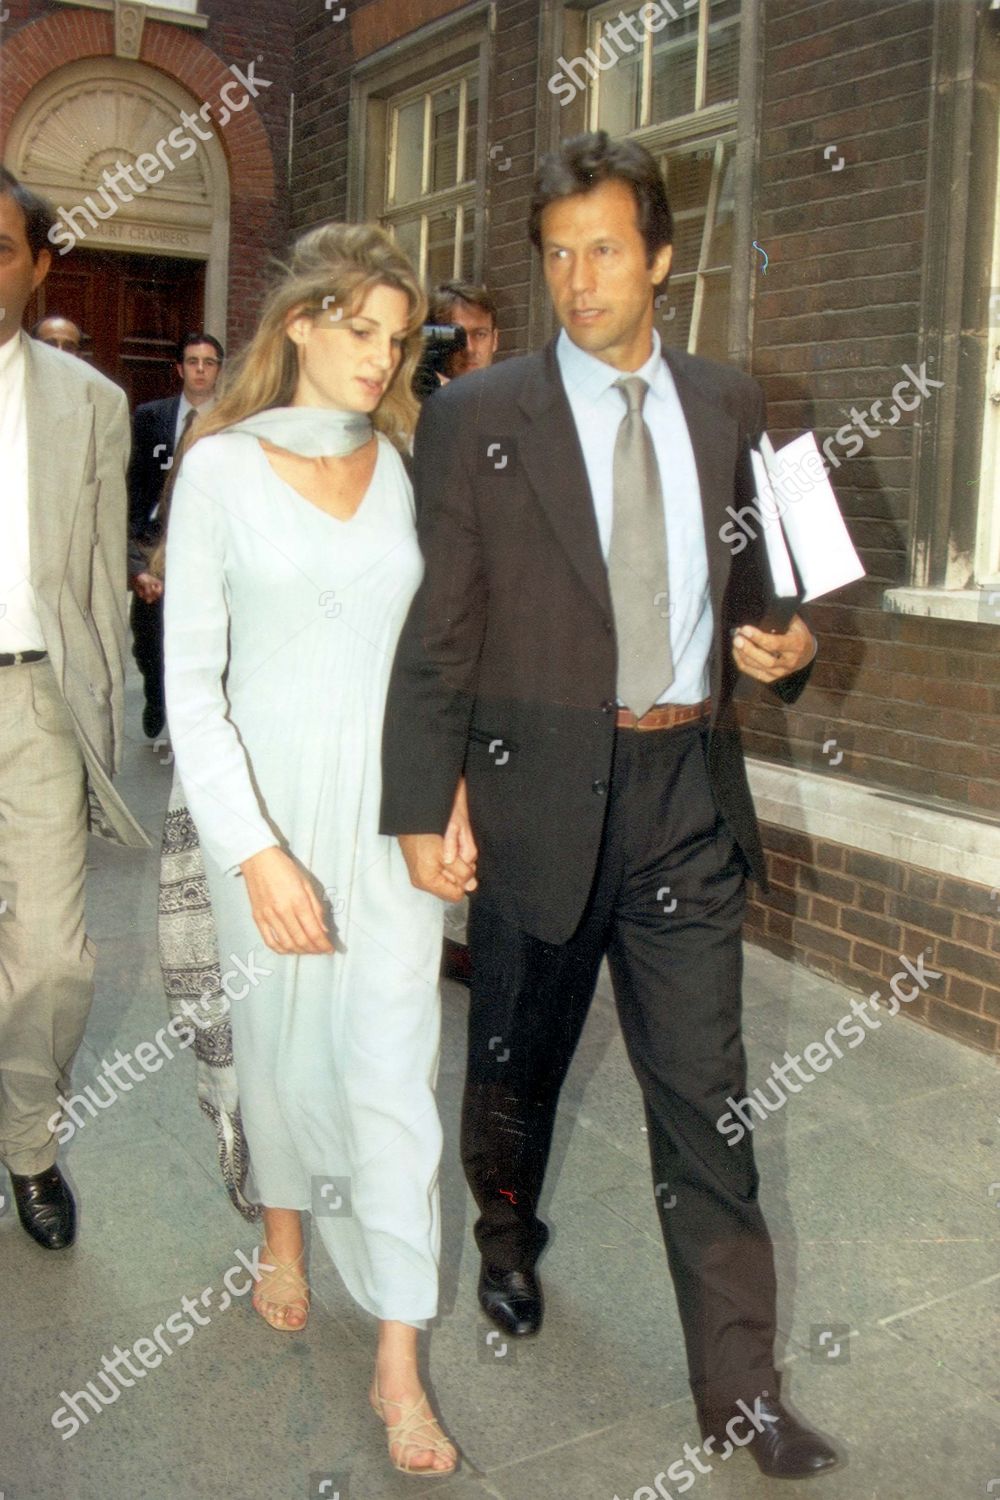 former-pakistan-cricket-captain-imran-khan-with-his-wife-jemima-khan-heads-for-a-new-clash-with-old-rival-ian-botham-this-time-in-court-ian-botham-and-allan-lamb-are-suing-him-for-libel-claiming-that-imran-called-them-racists-and-said-they-were-une-shutterstock-editorial-3373704a.jpg